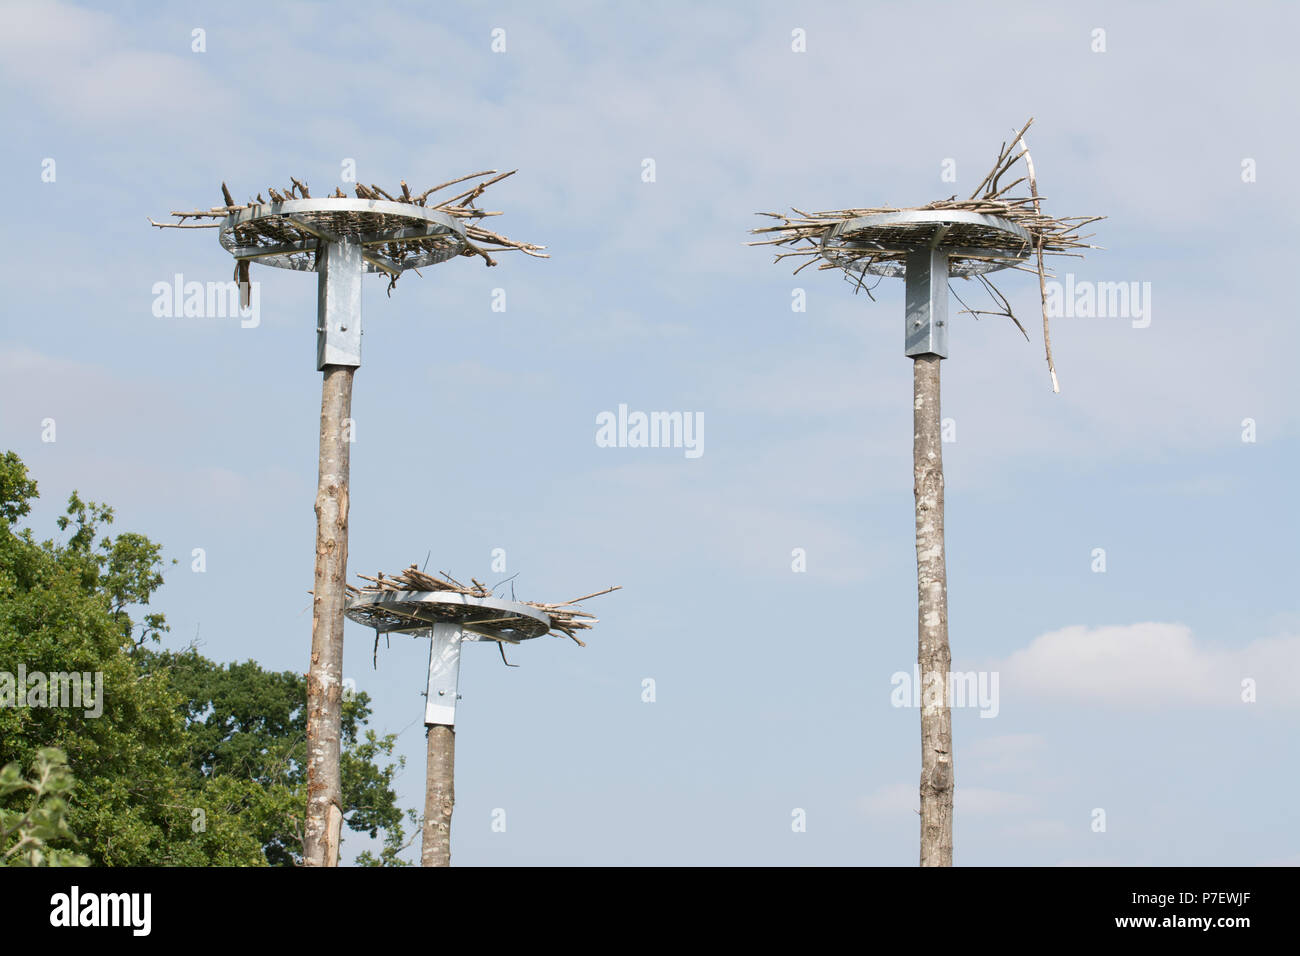 White stork nesting platforms at the Knepp Estate near Horsham, West Sussex, UK. These are for the white stork reintroduction project. Stock Photo